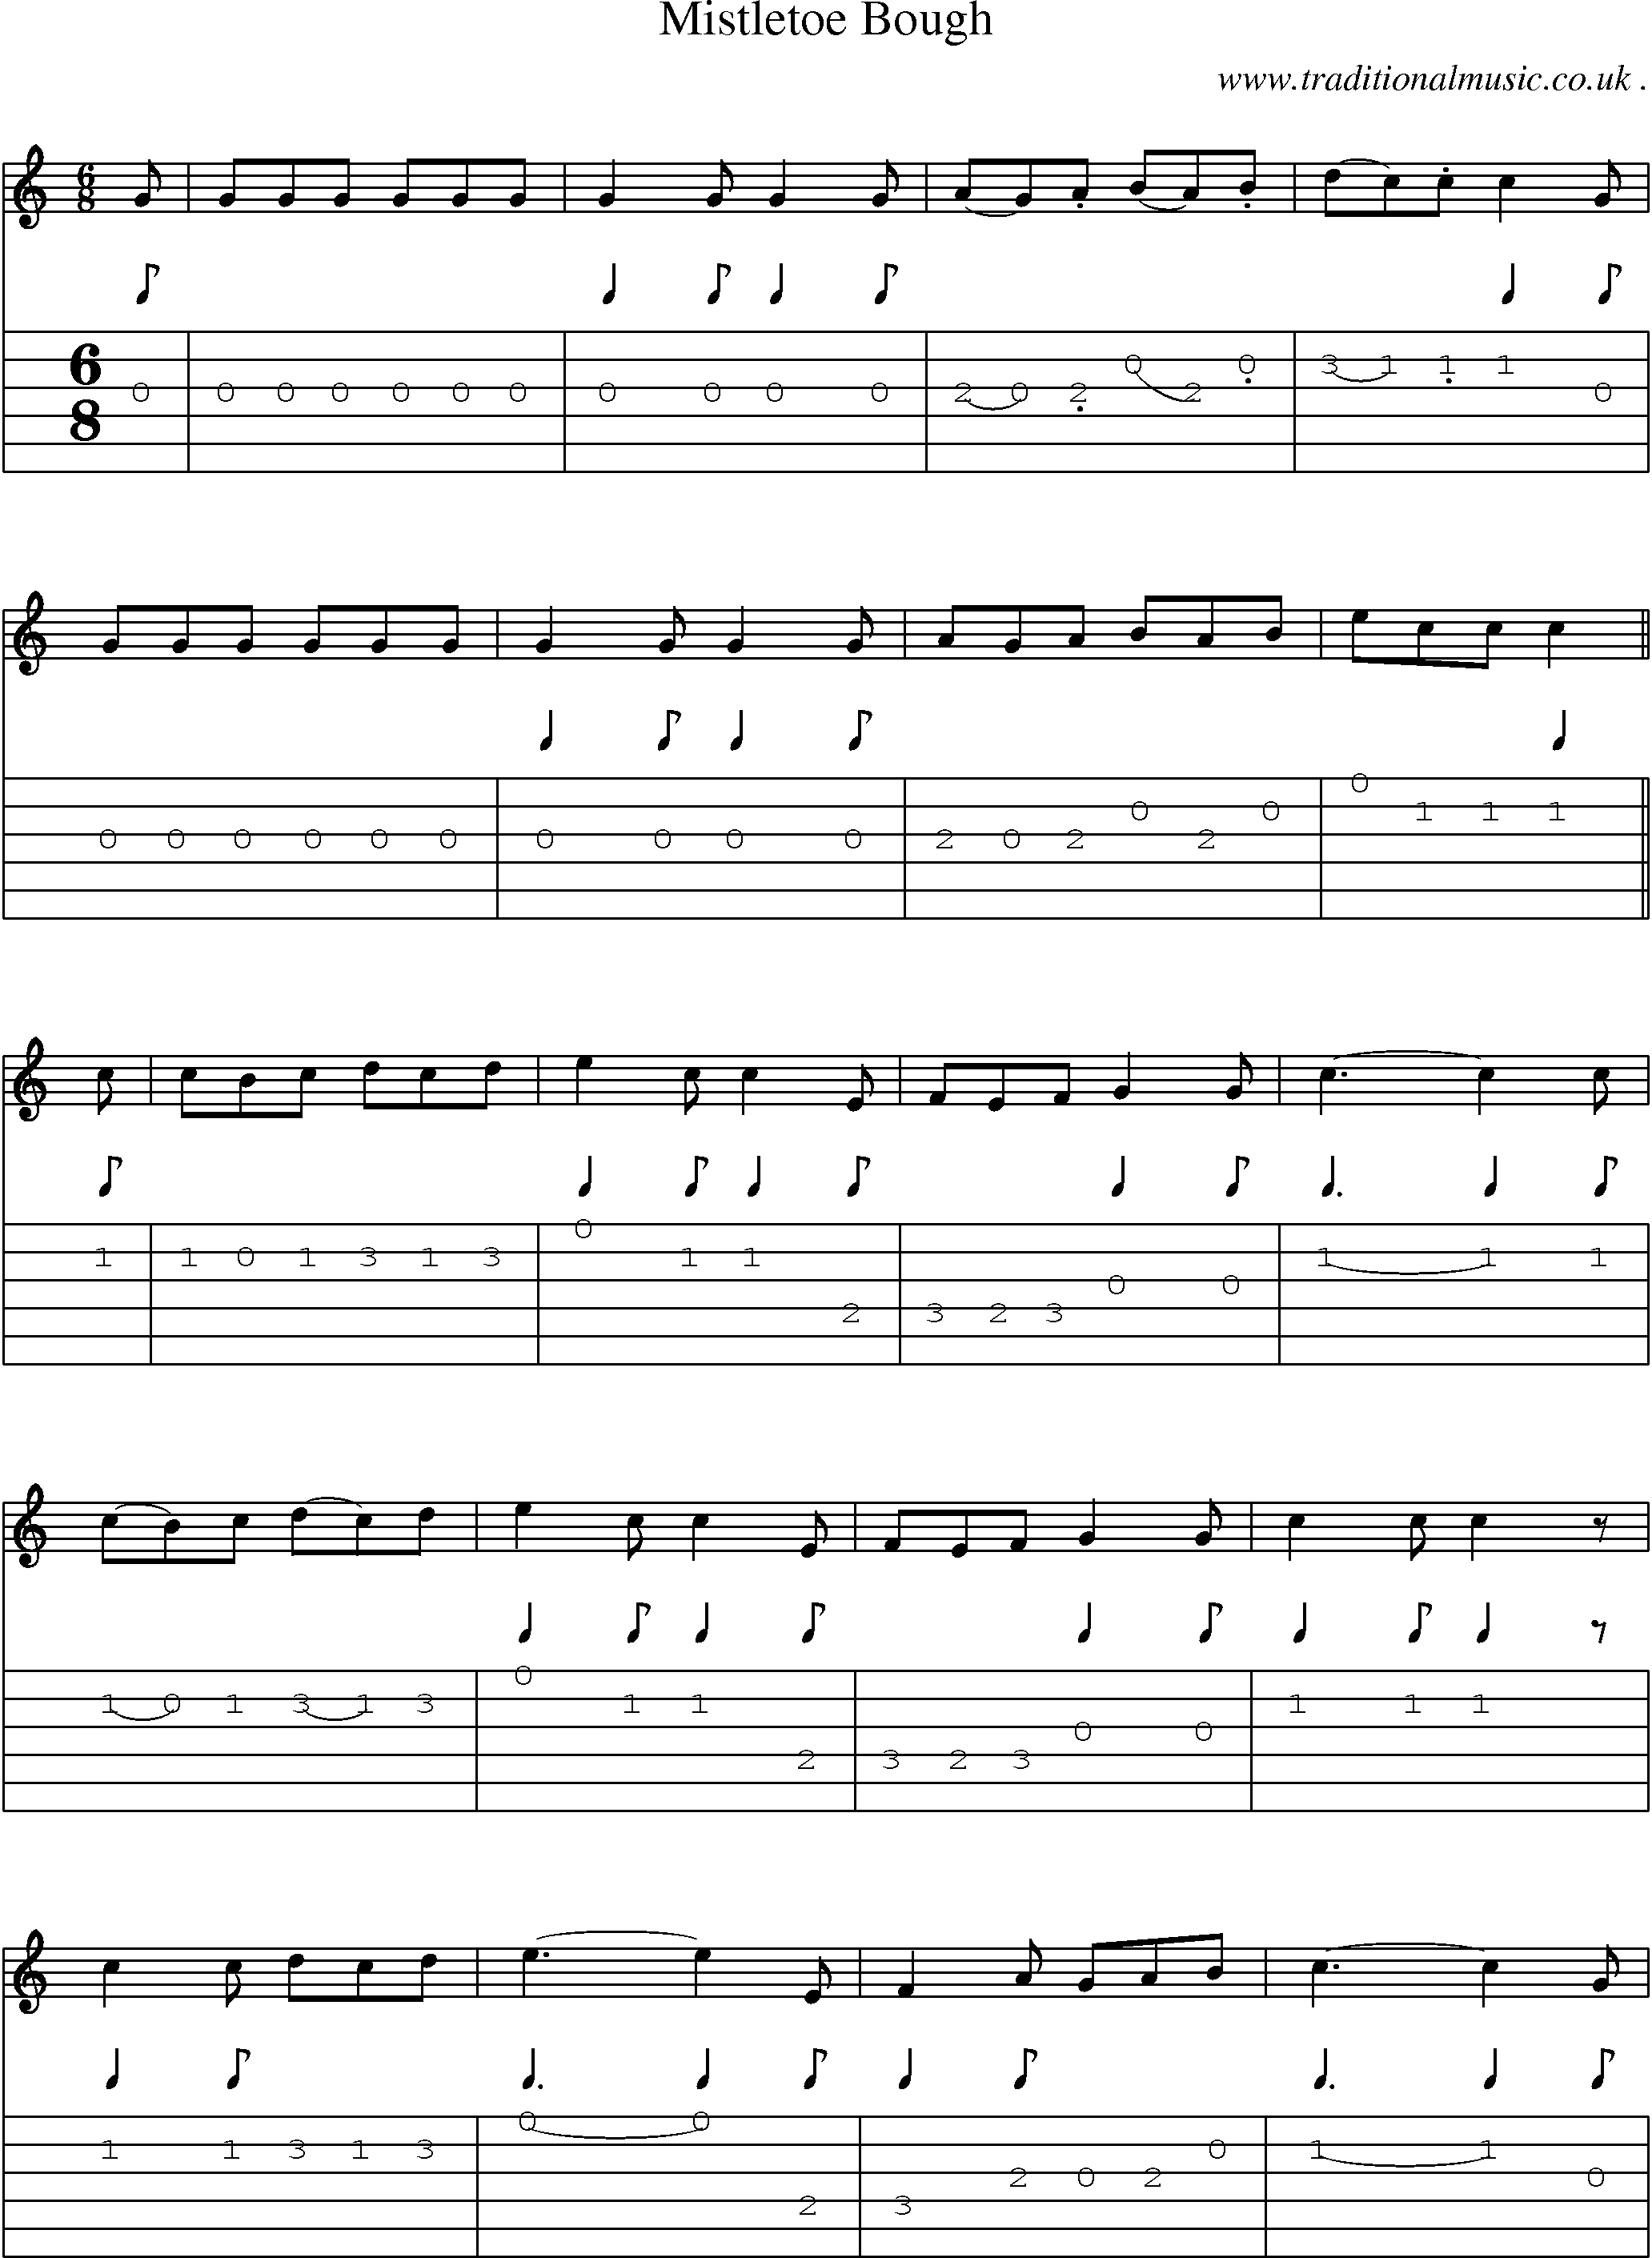 Sheet-Music and Guitar Tabs for Mistletoe Bough